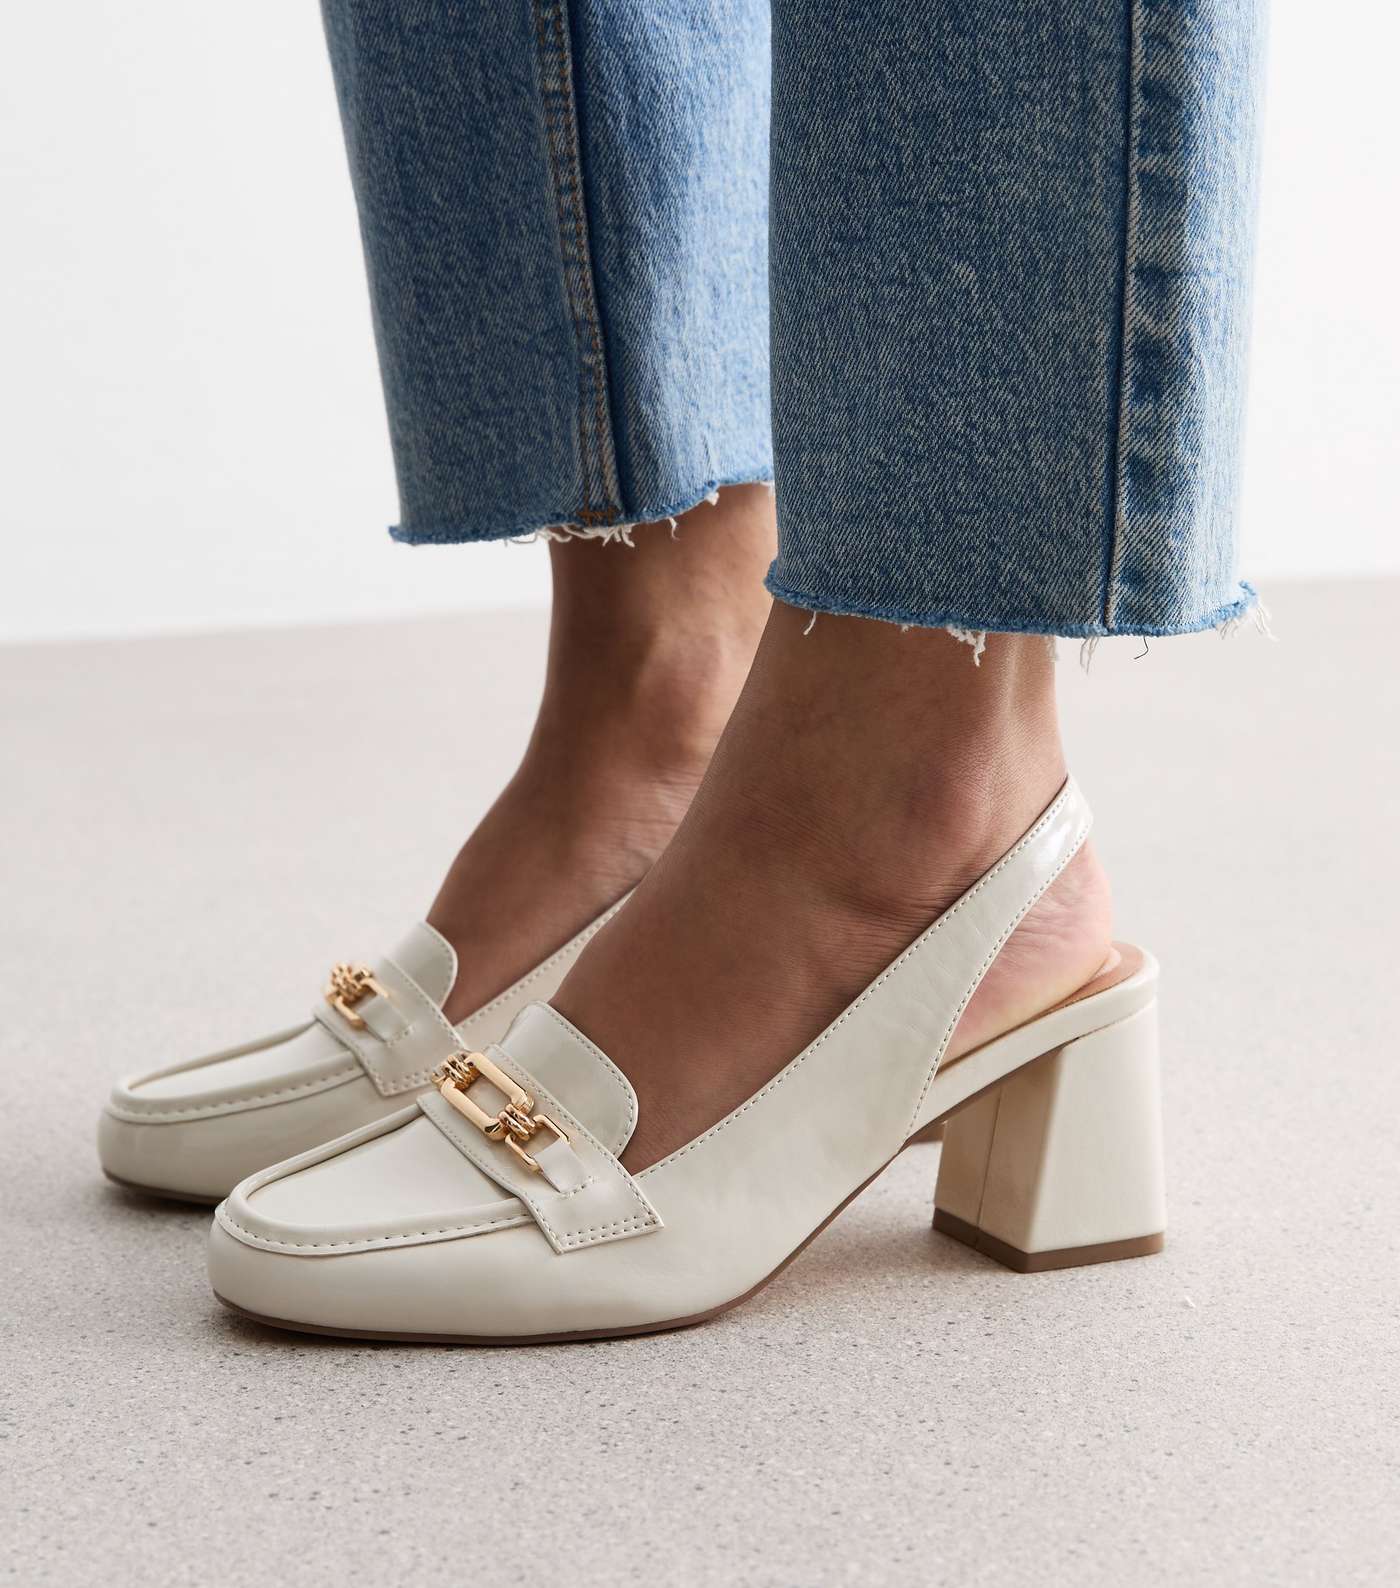 Off White Patent Slingback Block Heel Loafers Image 2